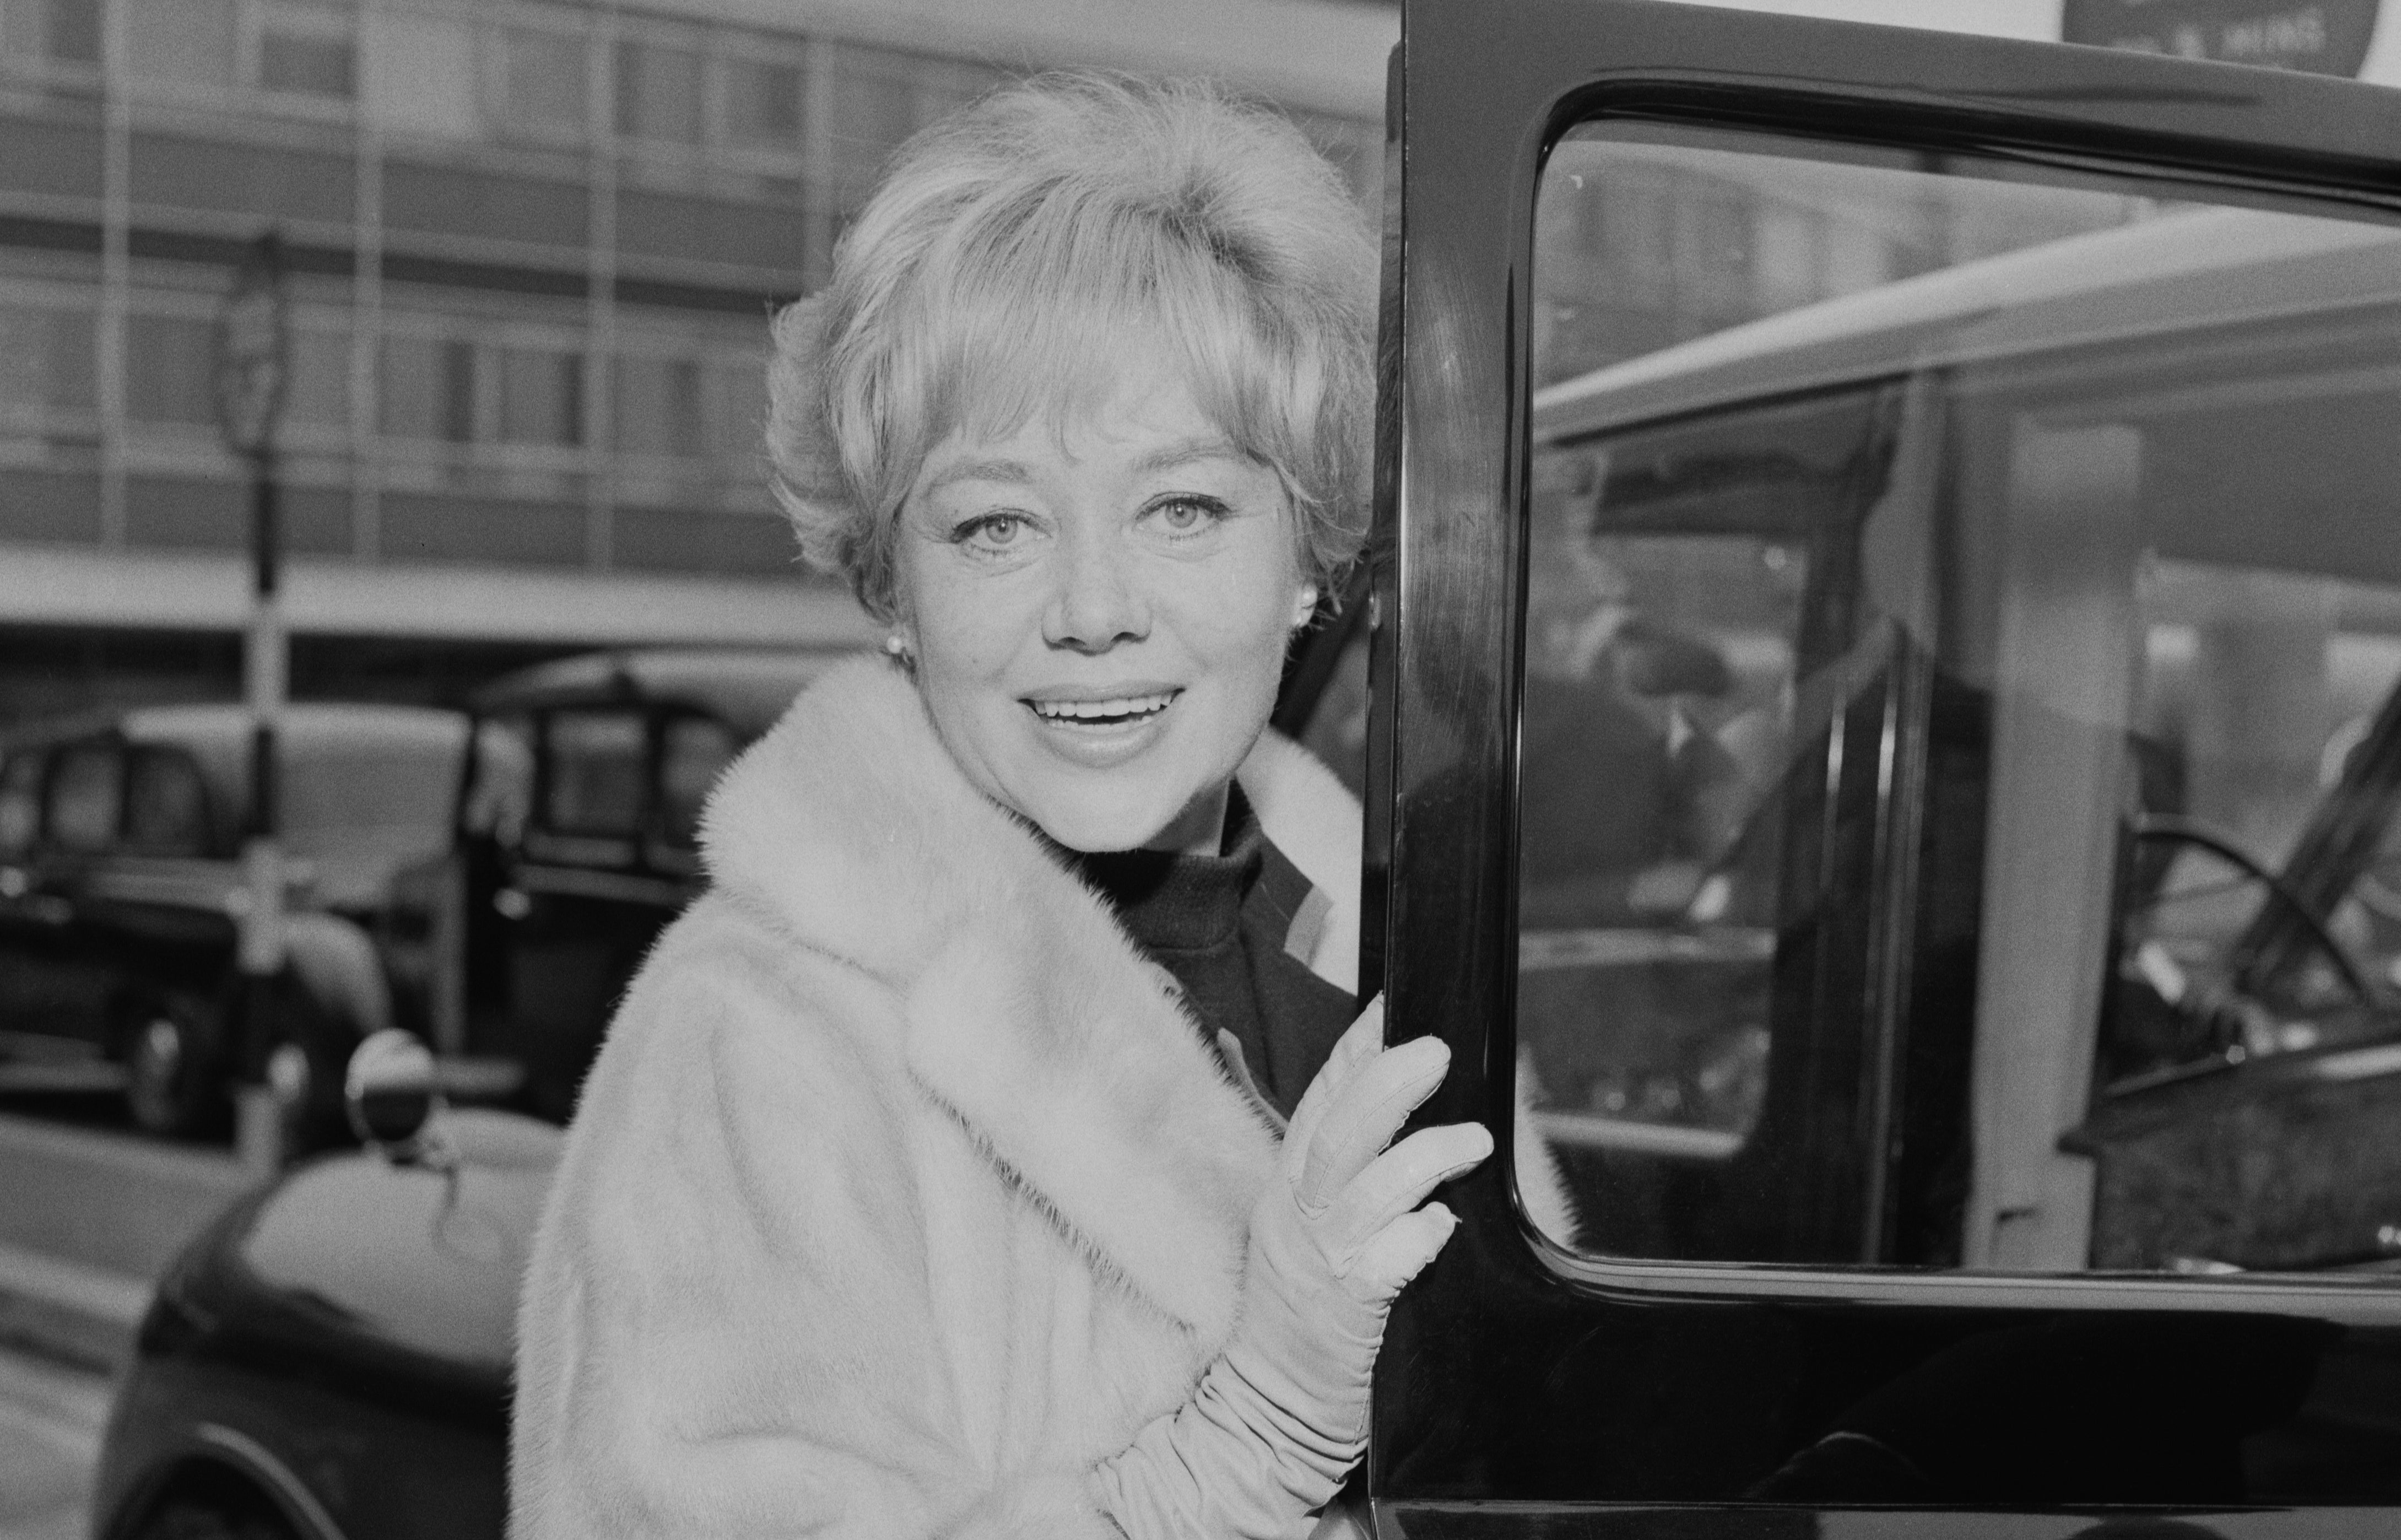 In 1966, two years after her star turn in ‘Mary Poppins'